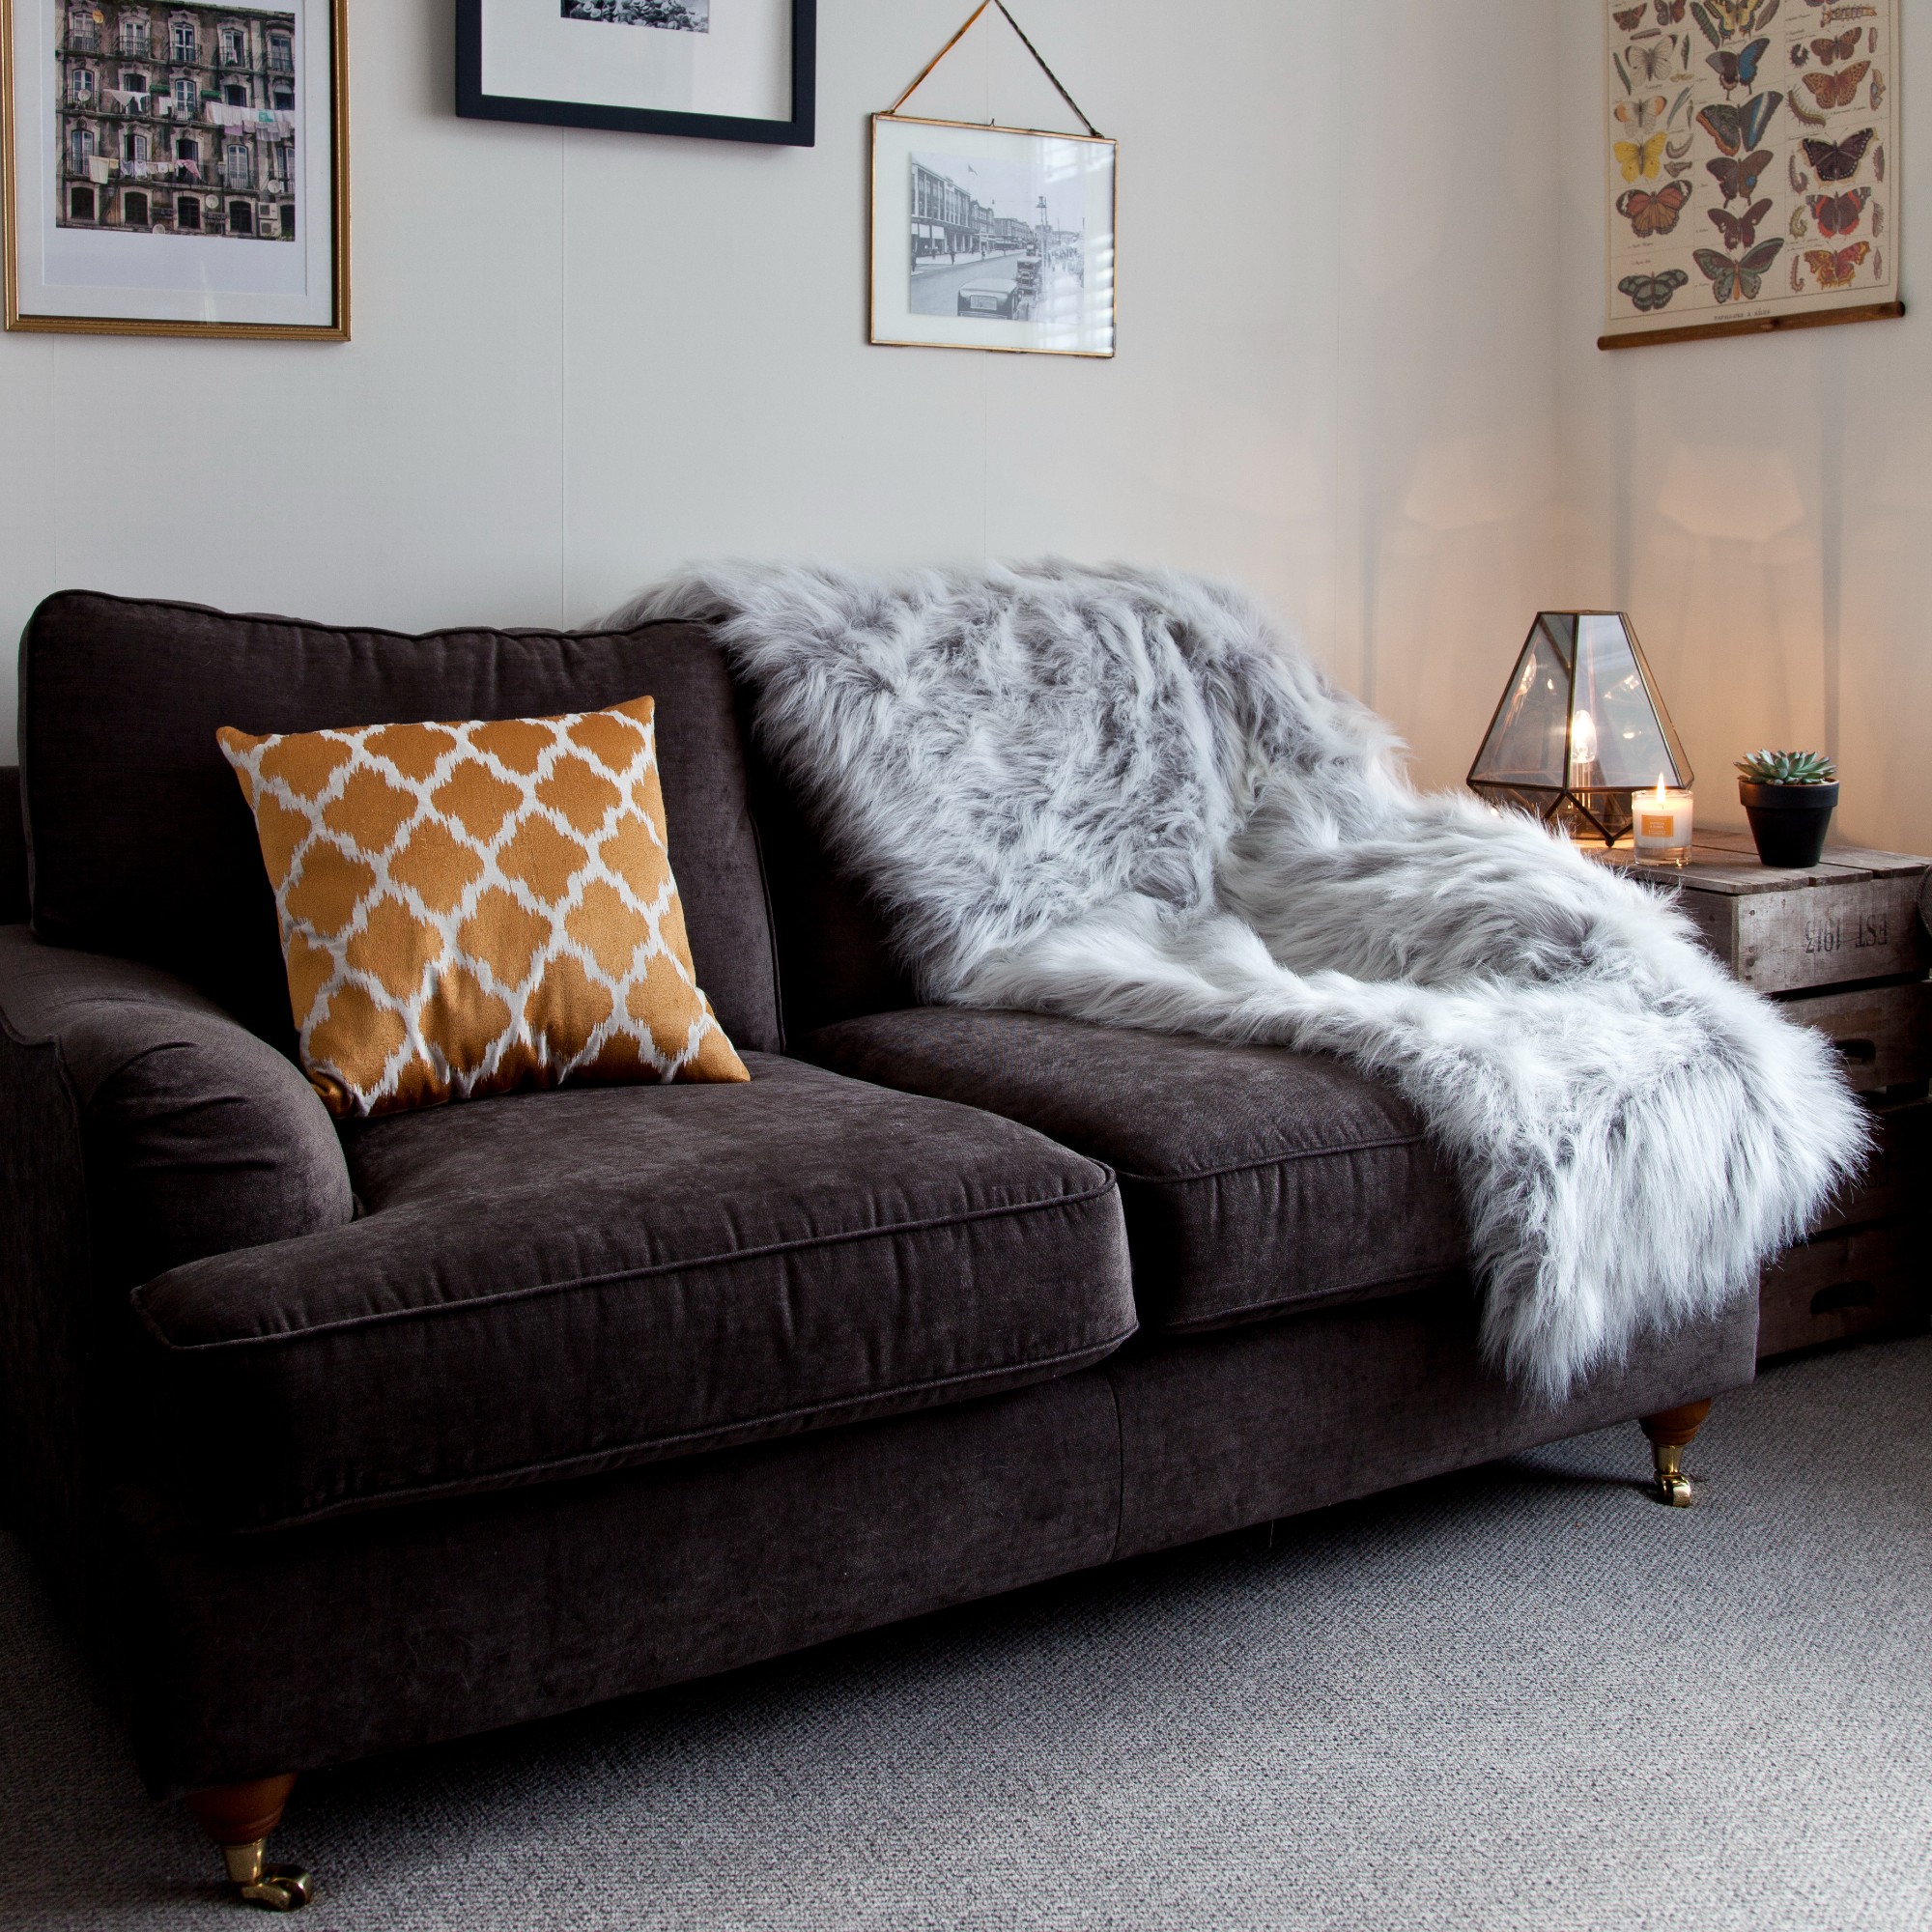 How to Safely Clean Your Suede Sofa - Fantastic Cleaners Blog